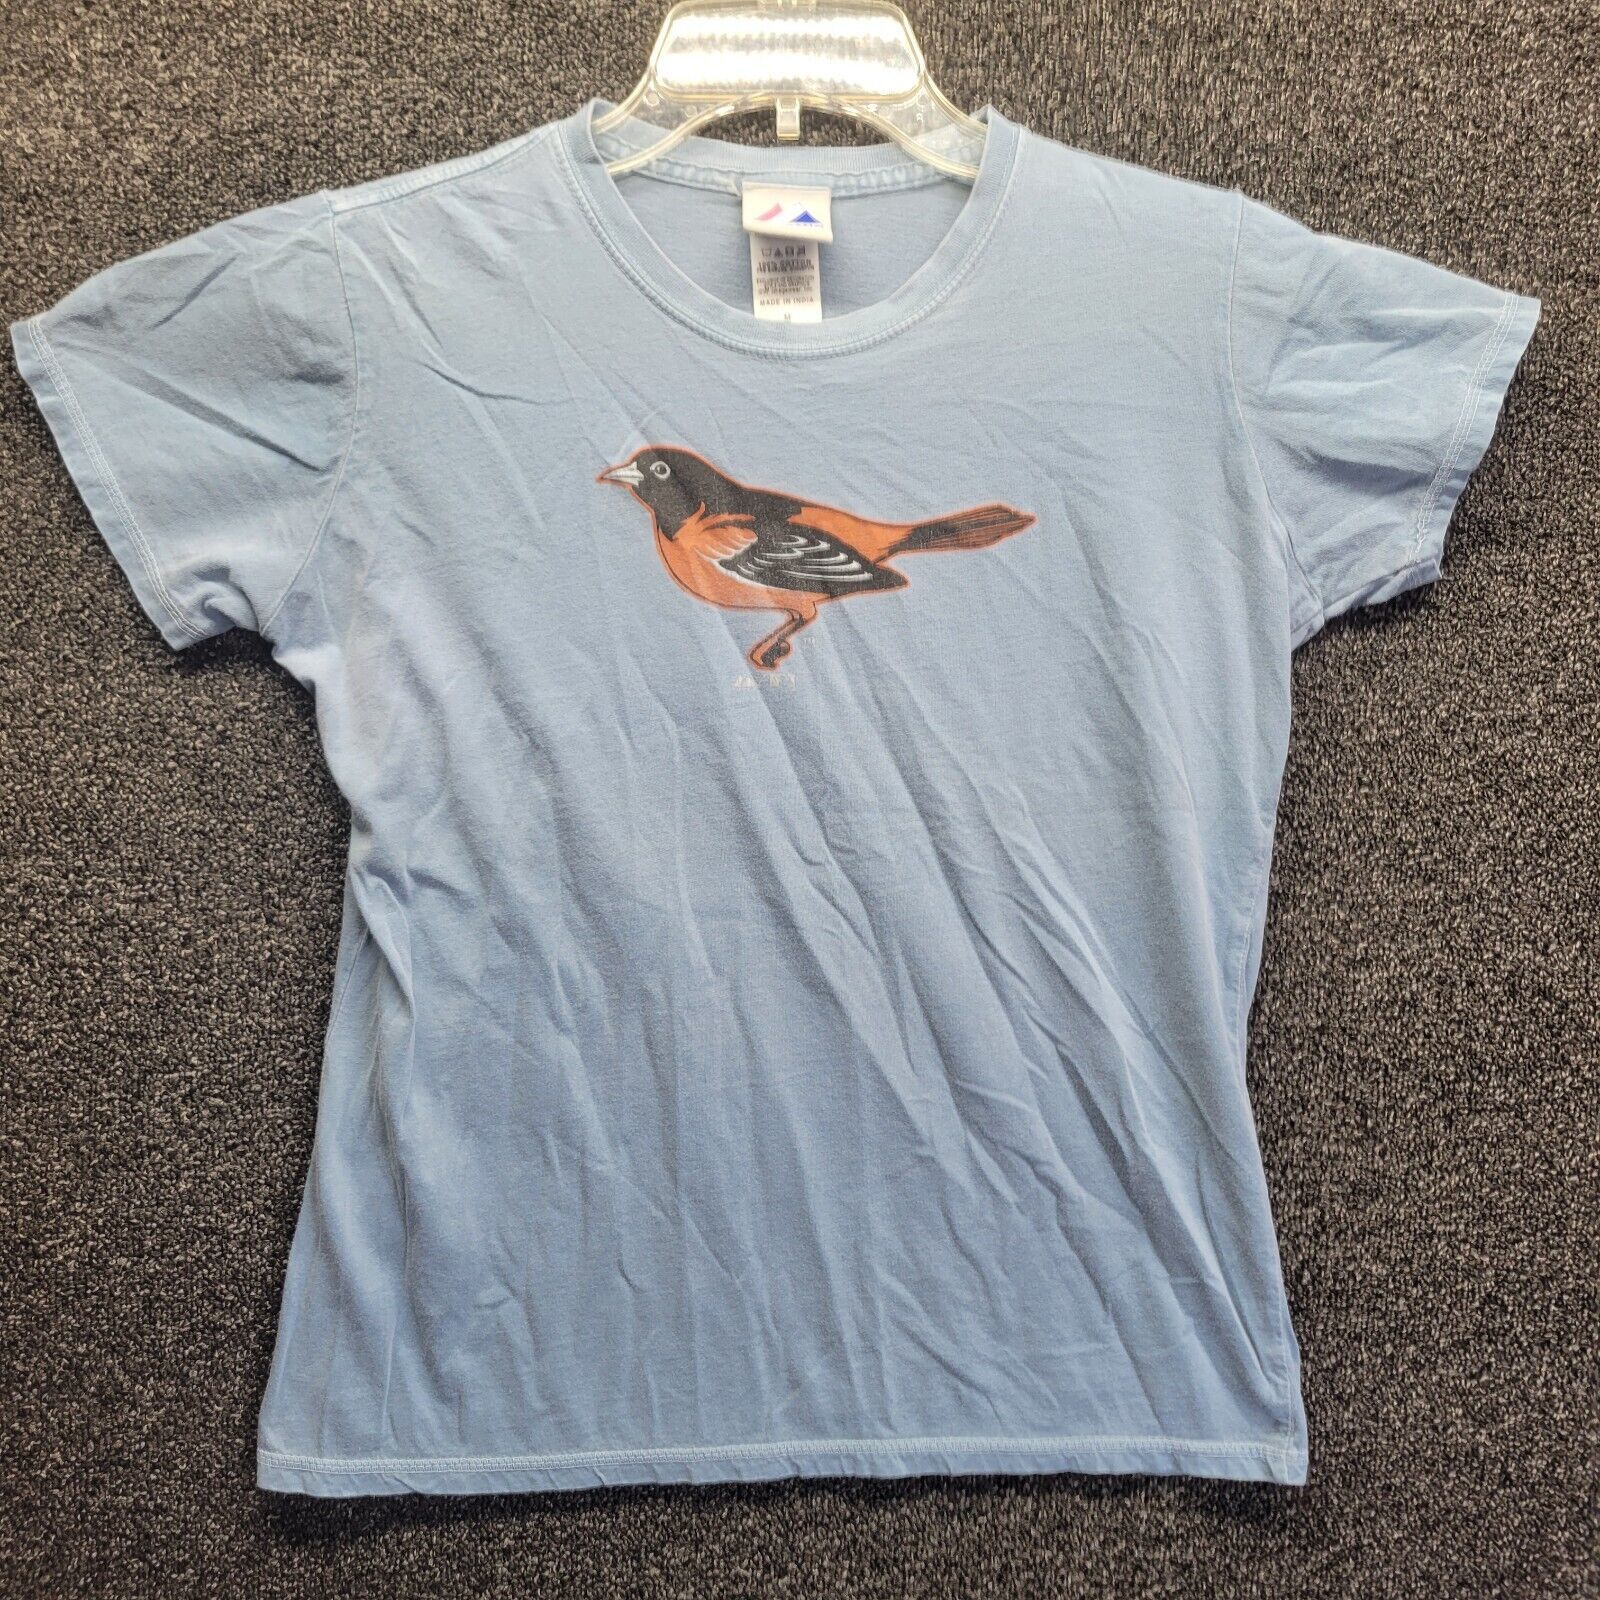 Primary image for Majestic Women's Sz M Baltimore Orioles Bird T-Shirt Teal Blue/Green